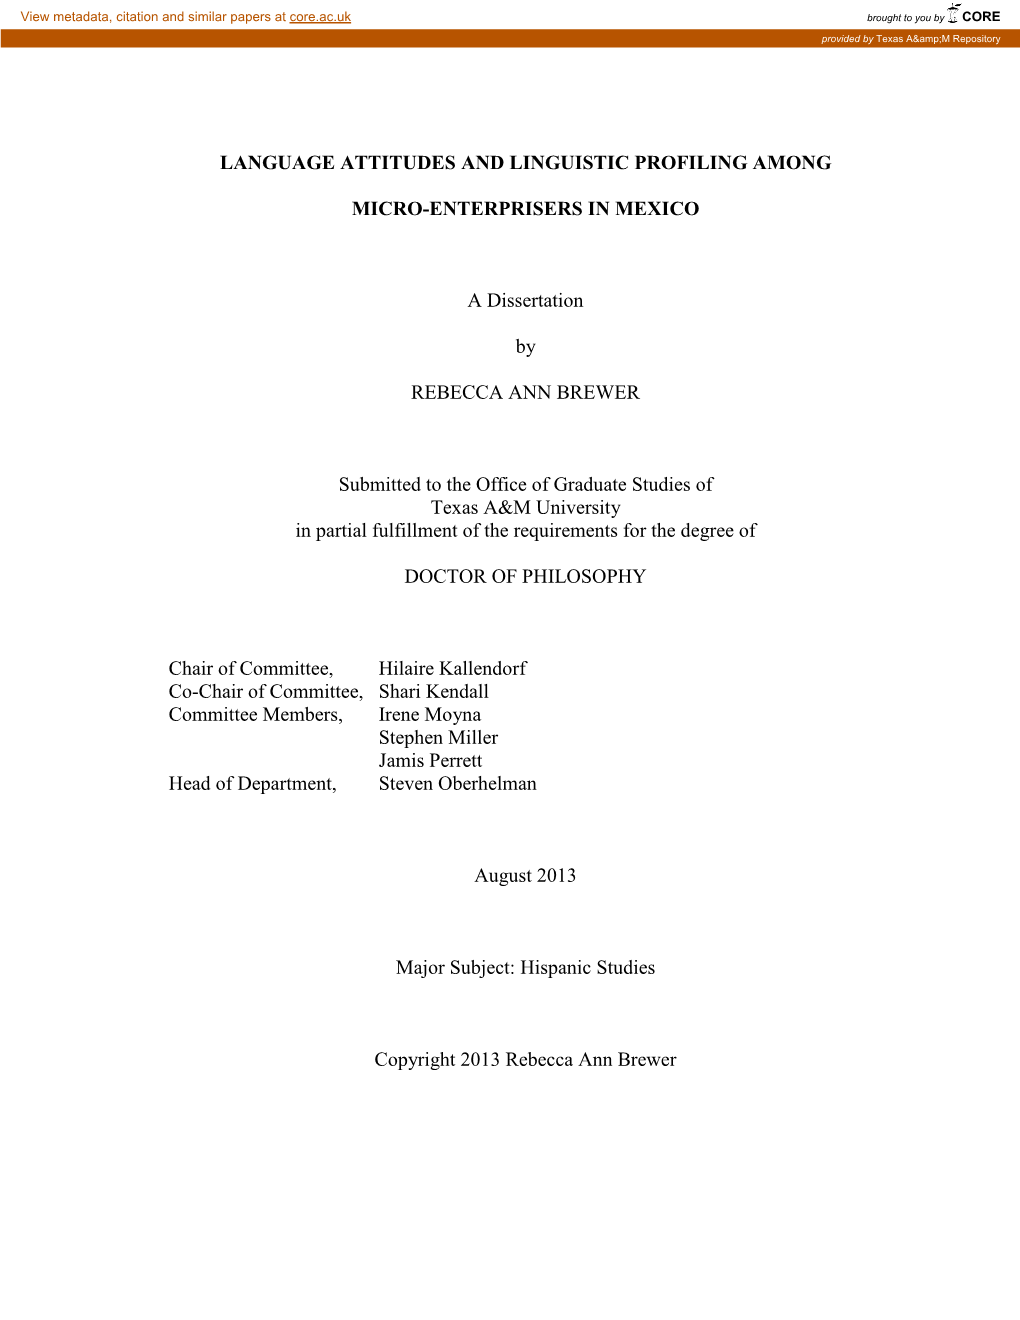 LANGUAGE ATTITUDES and LINGUISTIC PROFILING AMONG MICRO-ENTERPRISERS in MEXICO a Dissertation by REBECCA ANN BREWER Submitted